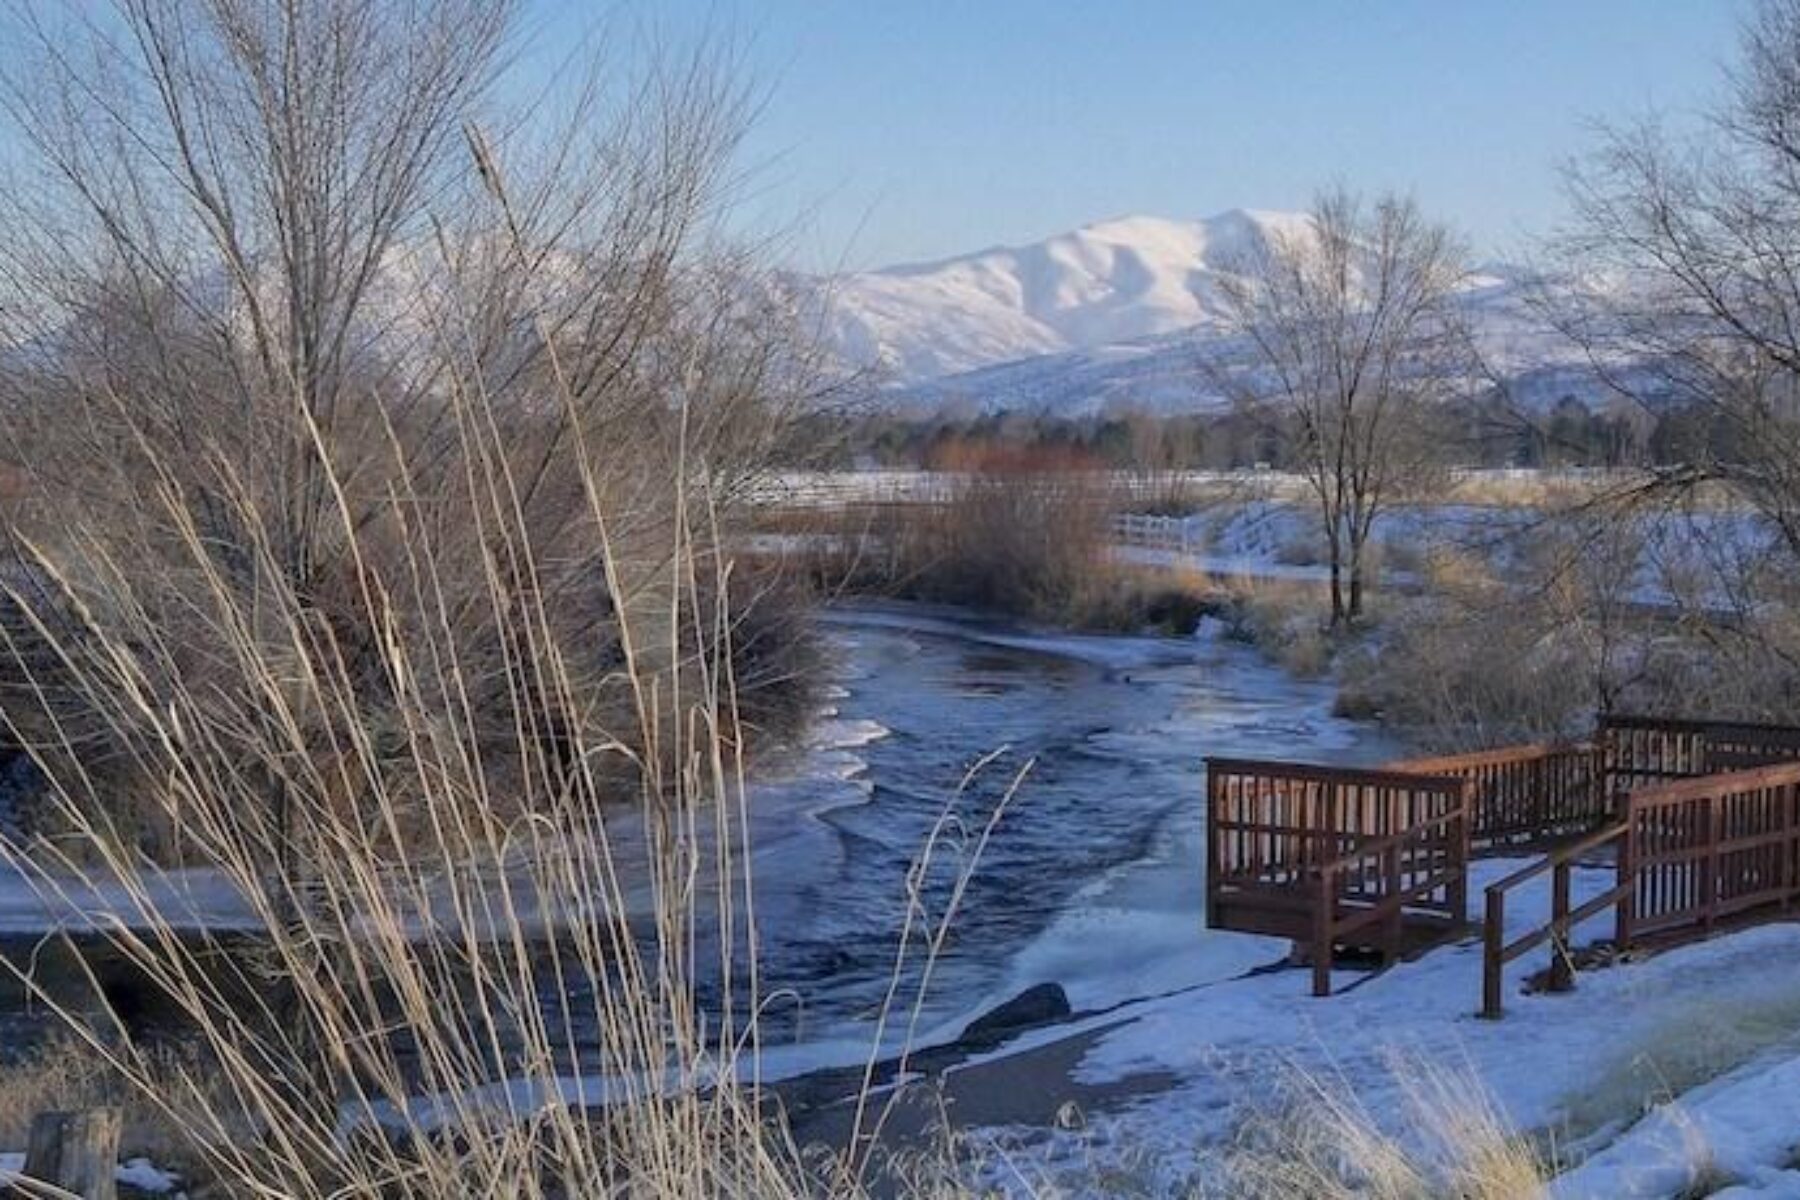 Portneuf Greenway through the Edson Fichter Nature Area | Photo by Charles R. Peterson